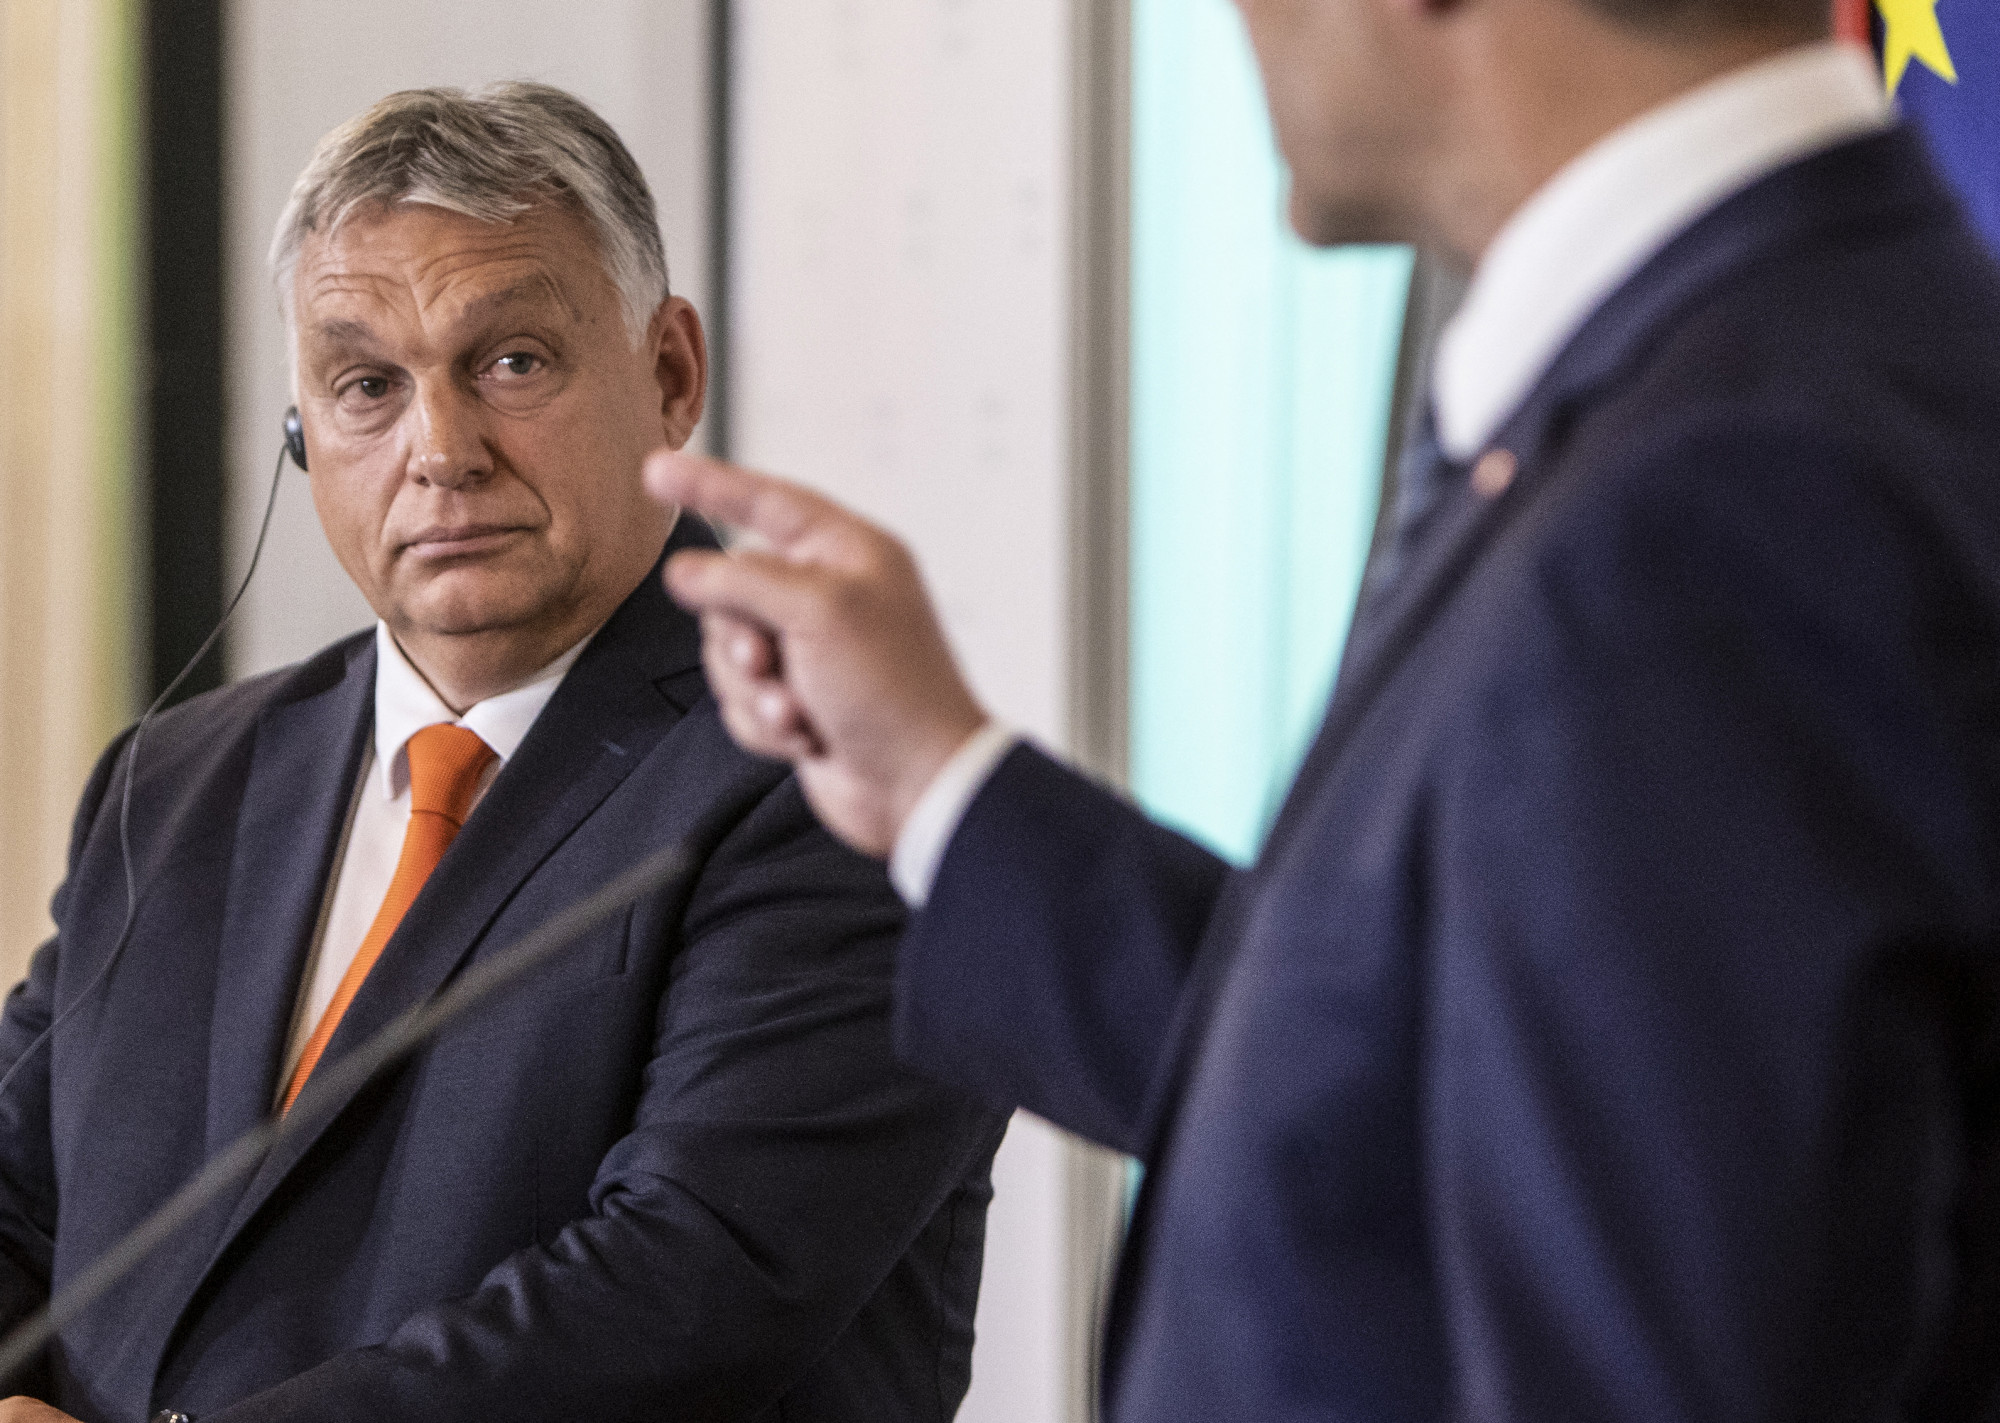 Orban causes outrage for opposing 'mixed race' society in Hungary